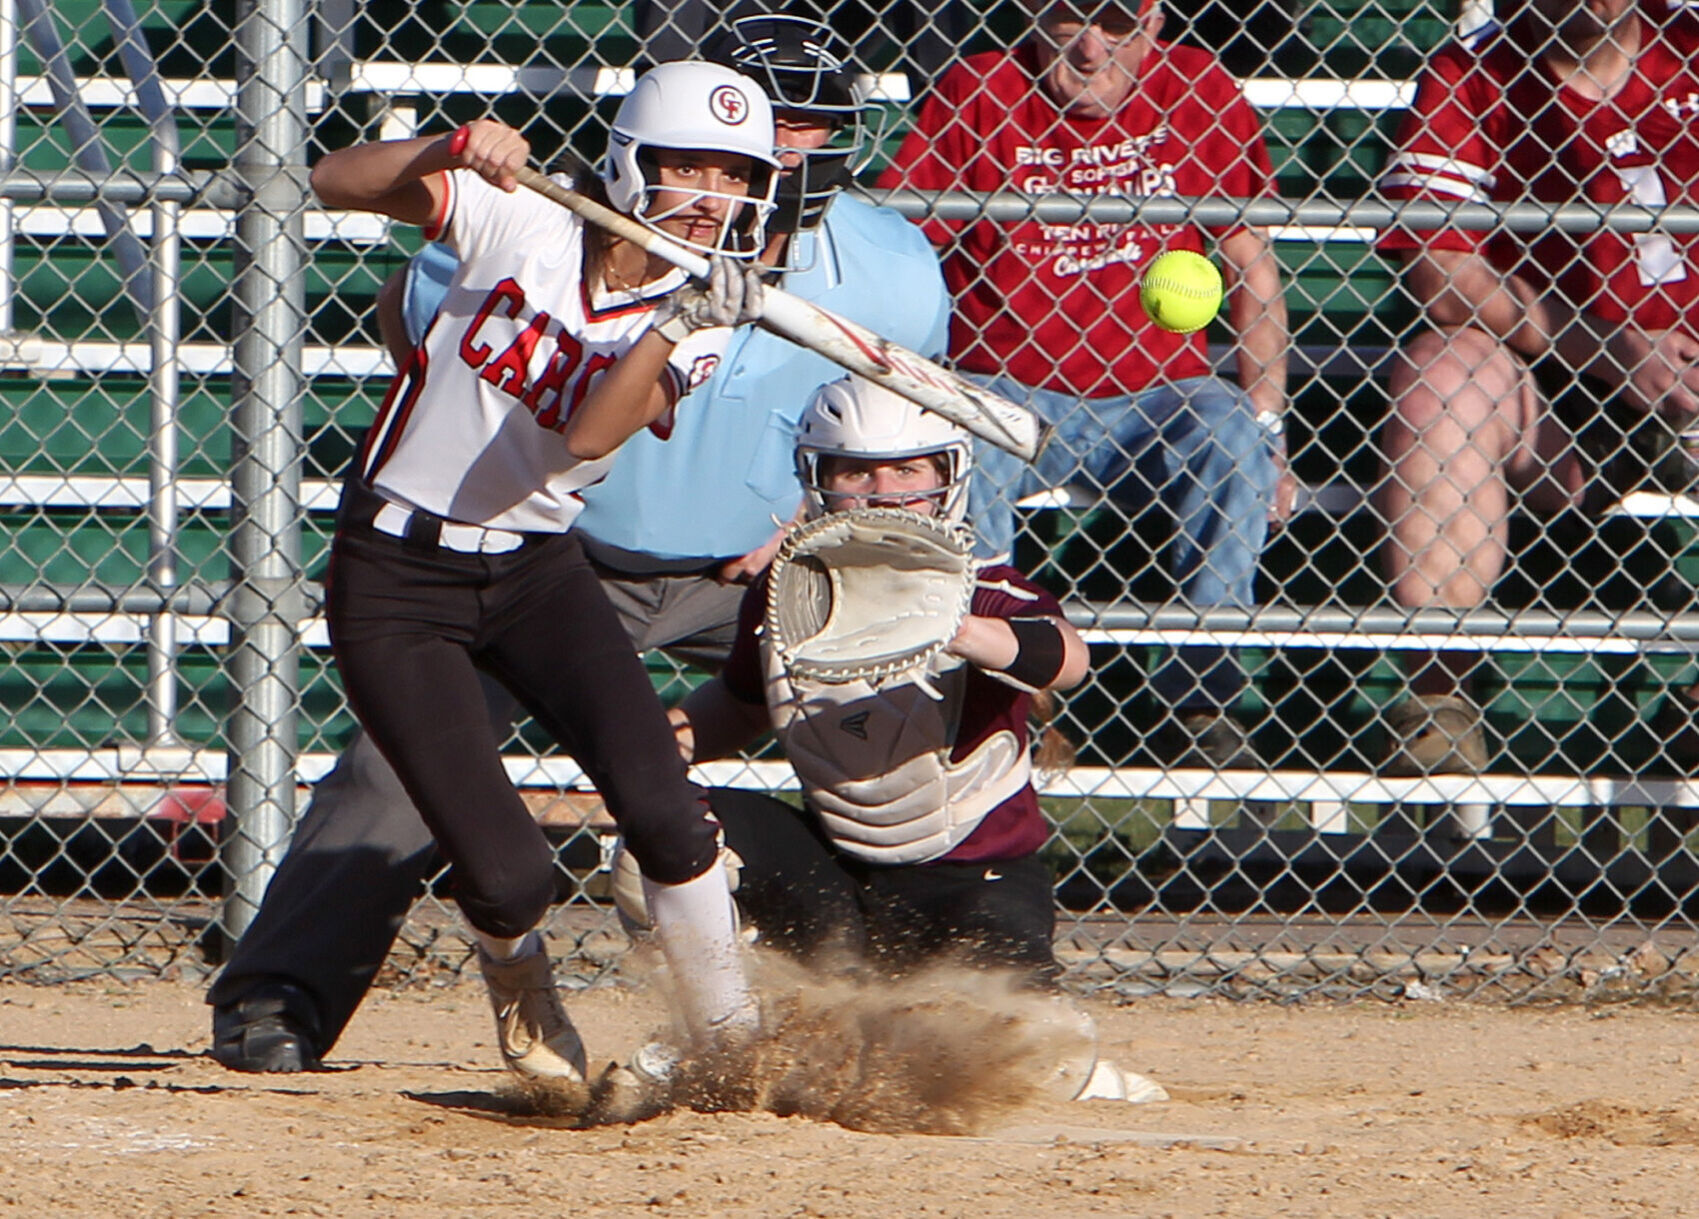 Chippewa Falls Softball Dominates Opening Game Against Eau Claire North with Stellar Performances by Johnston, Sanborn, and Geist